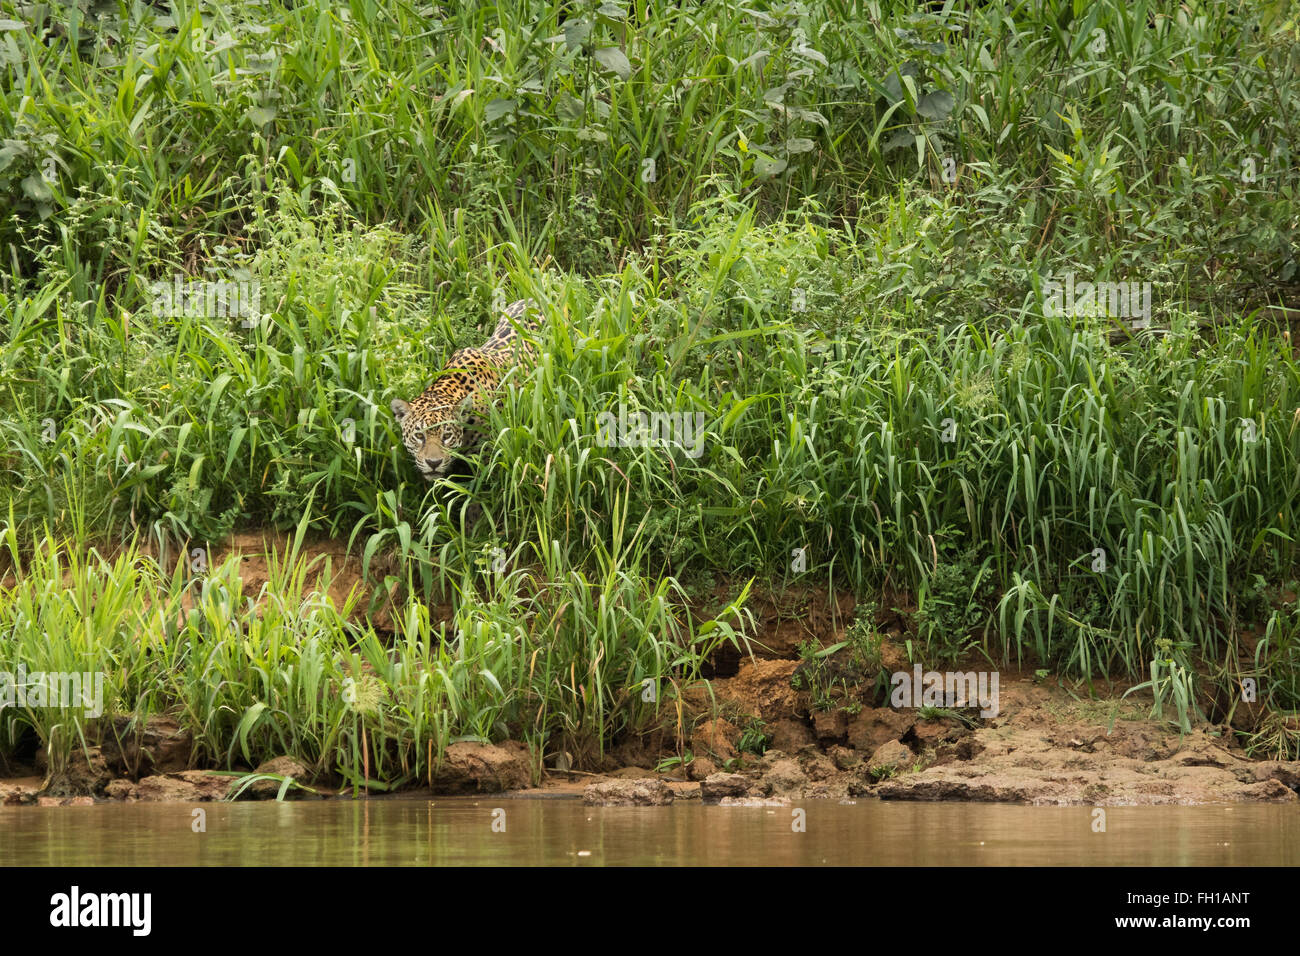 A wild sub-adult female jaguar on the banks of the Cuiaba river in the Pantanal, Brazil. Stock Photo